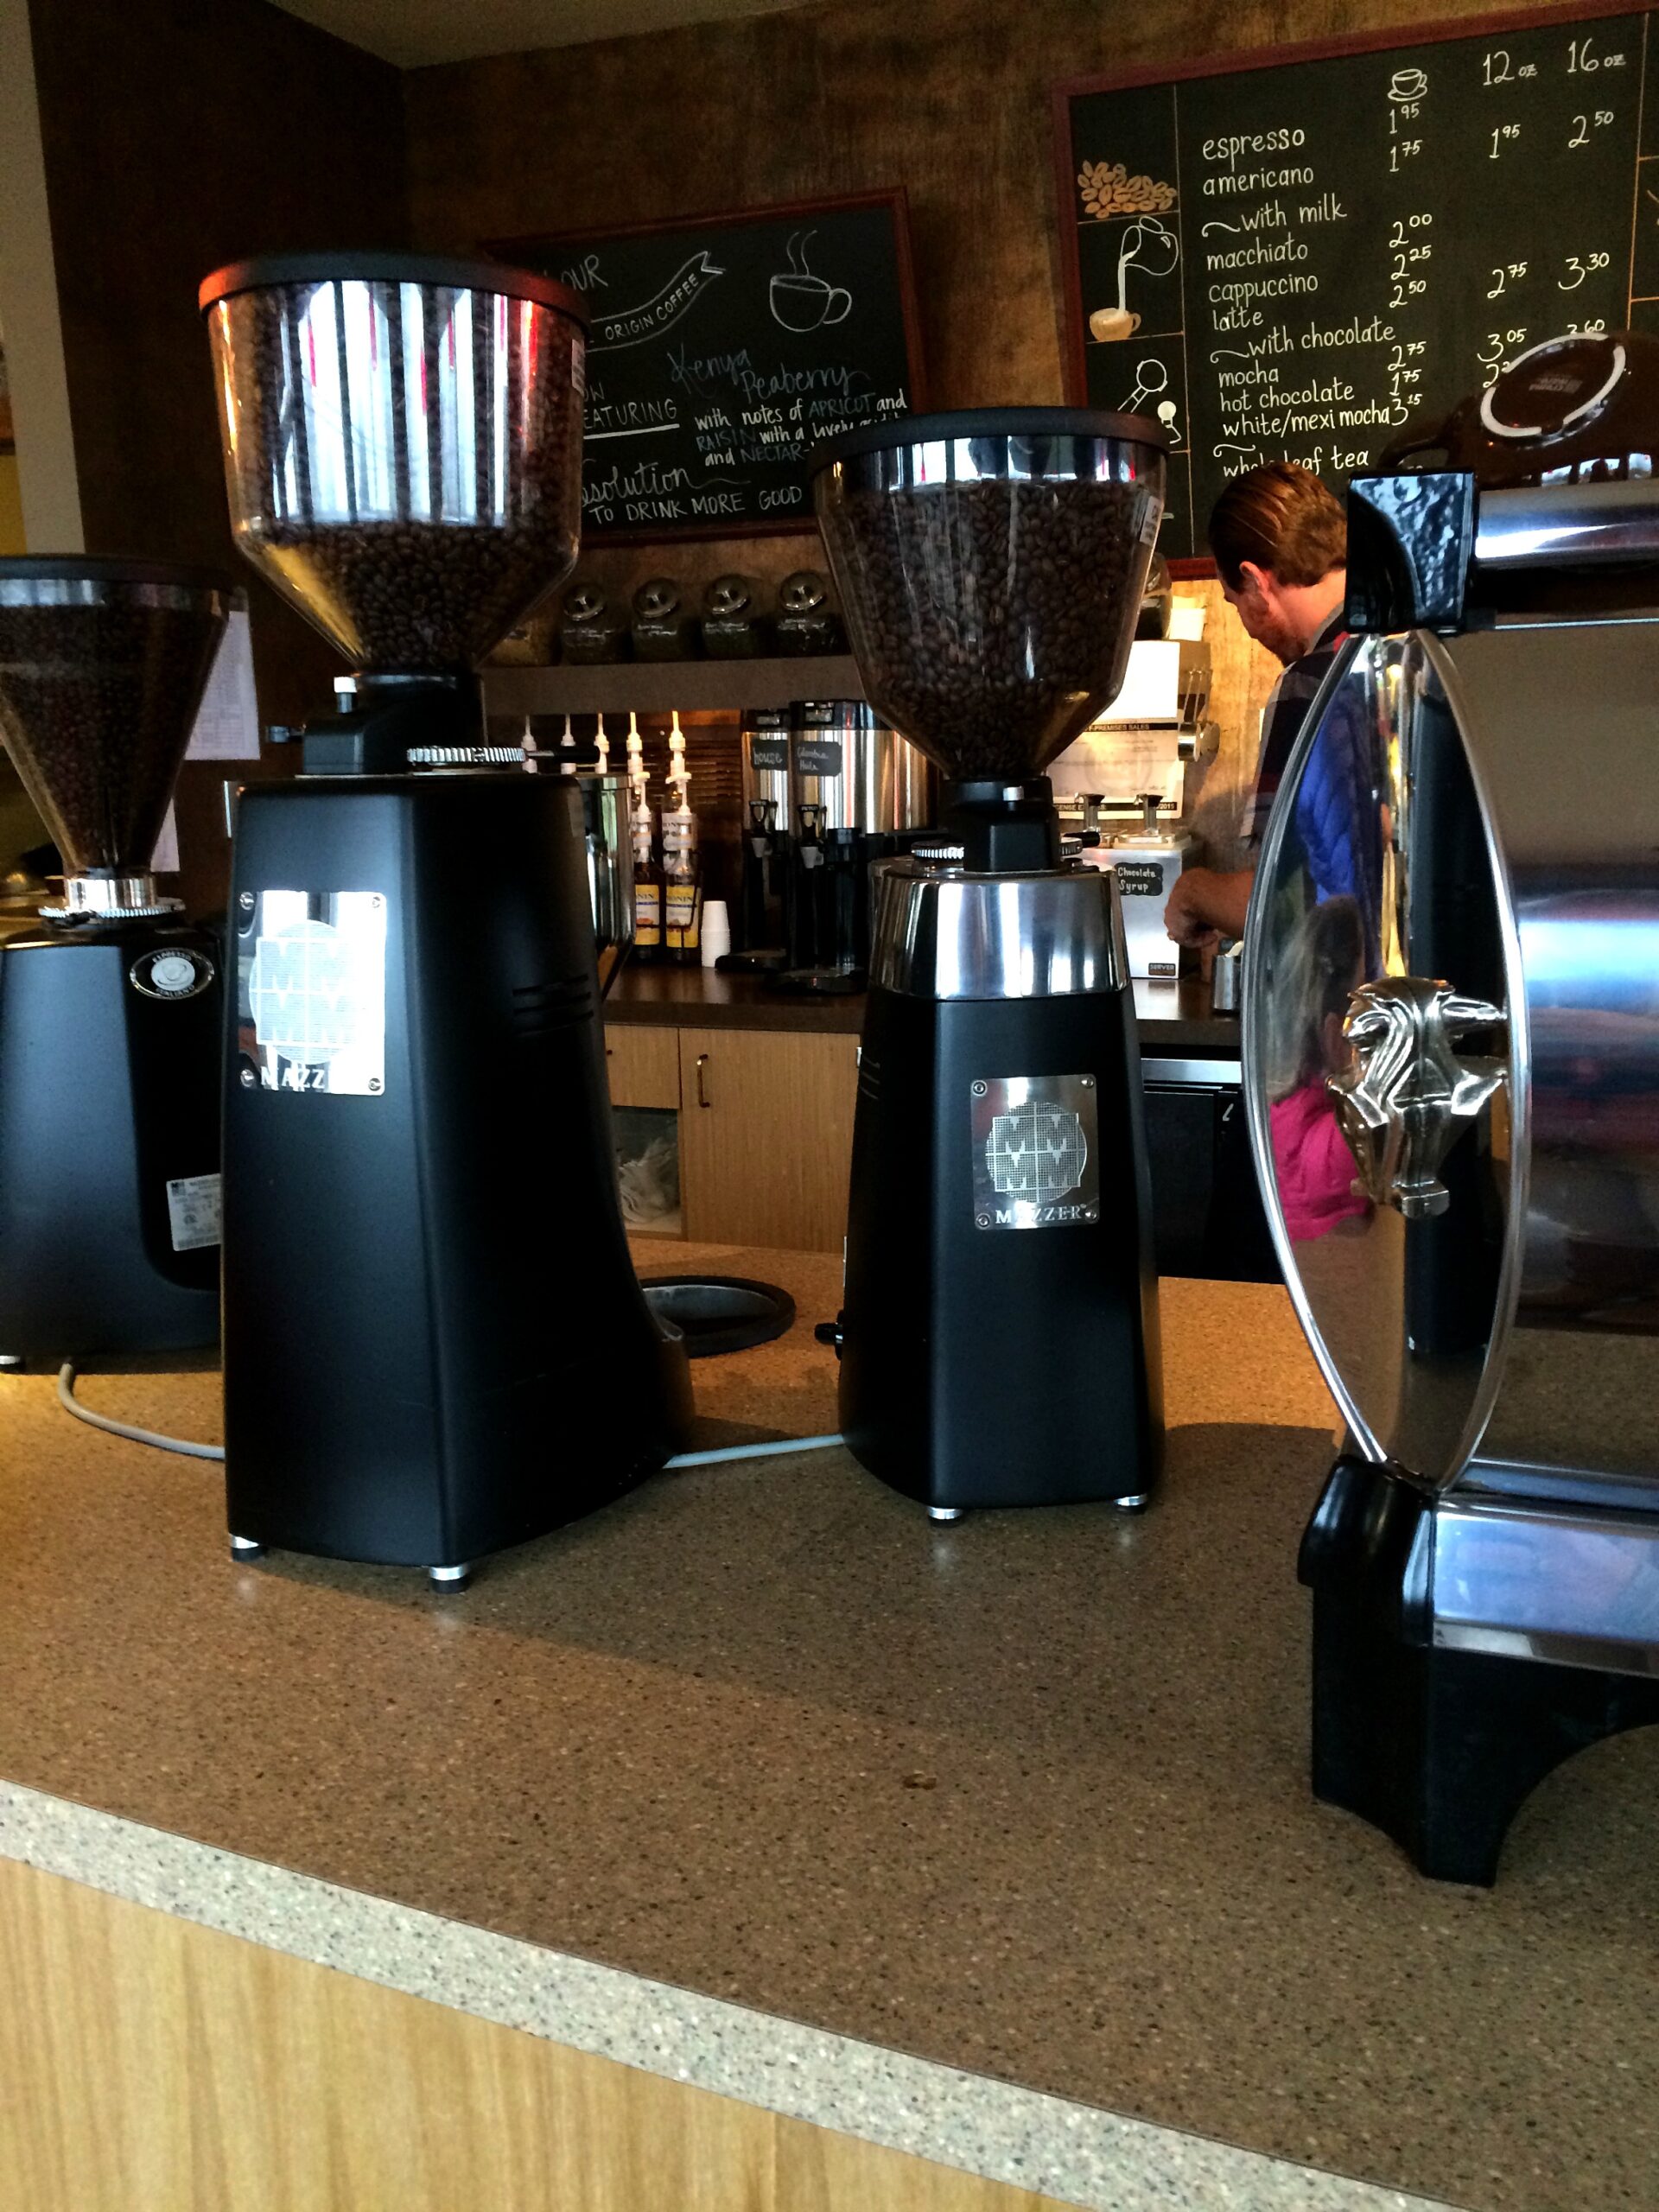 Containers filled with coffee beans stand on the front counter.